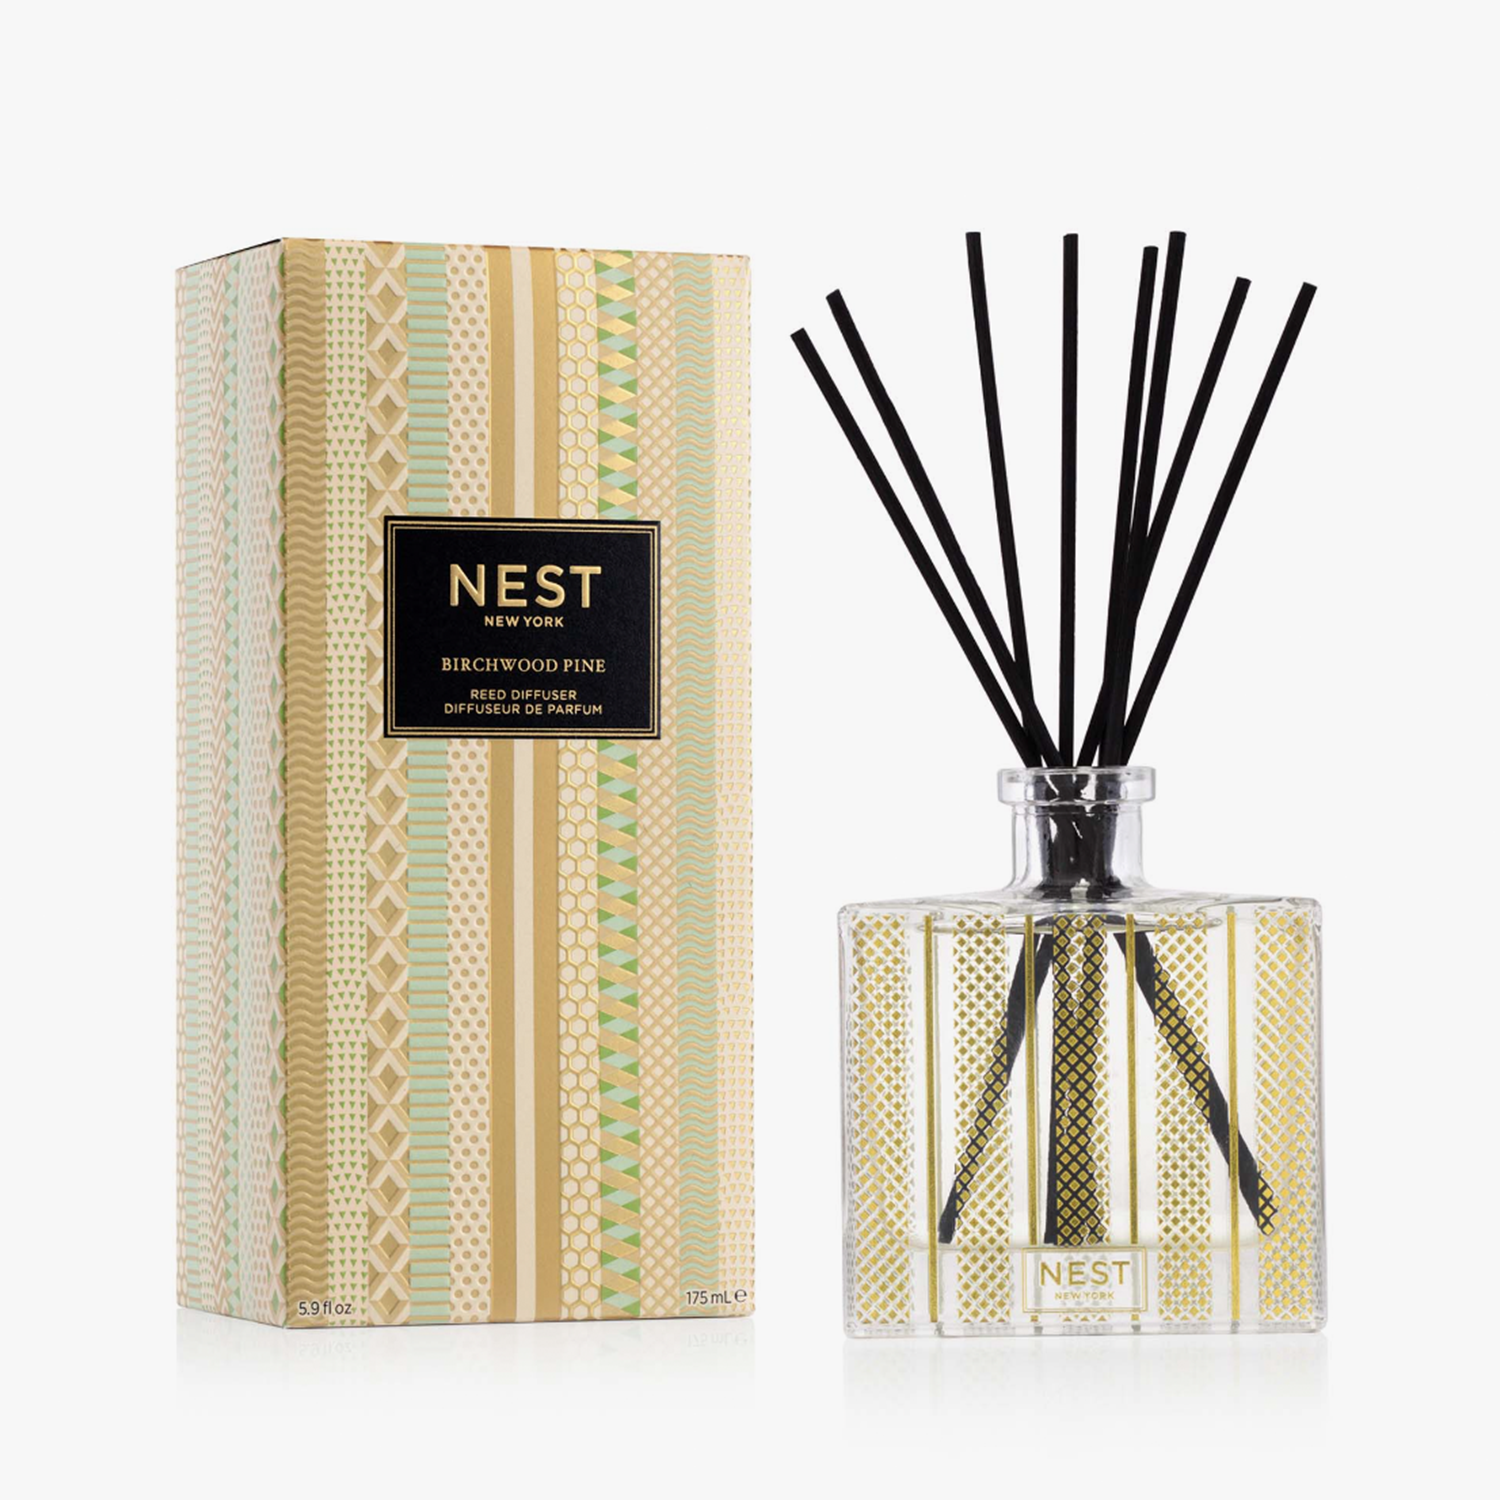 Nest Reed Diffuser with Etched Glass Vessel and Gold Striped Box